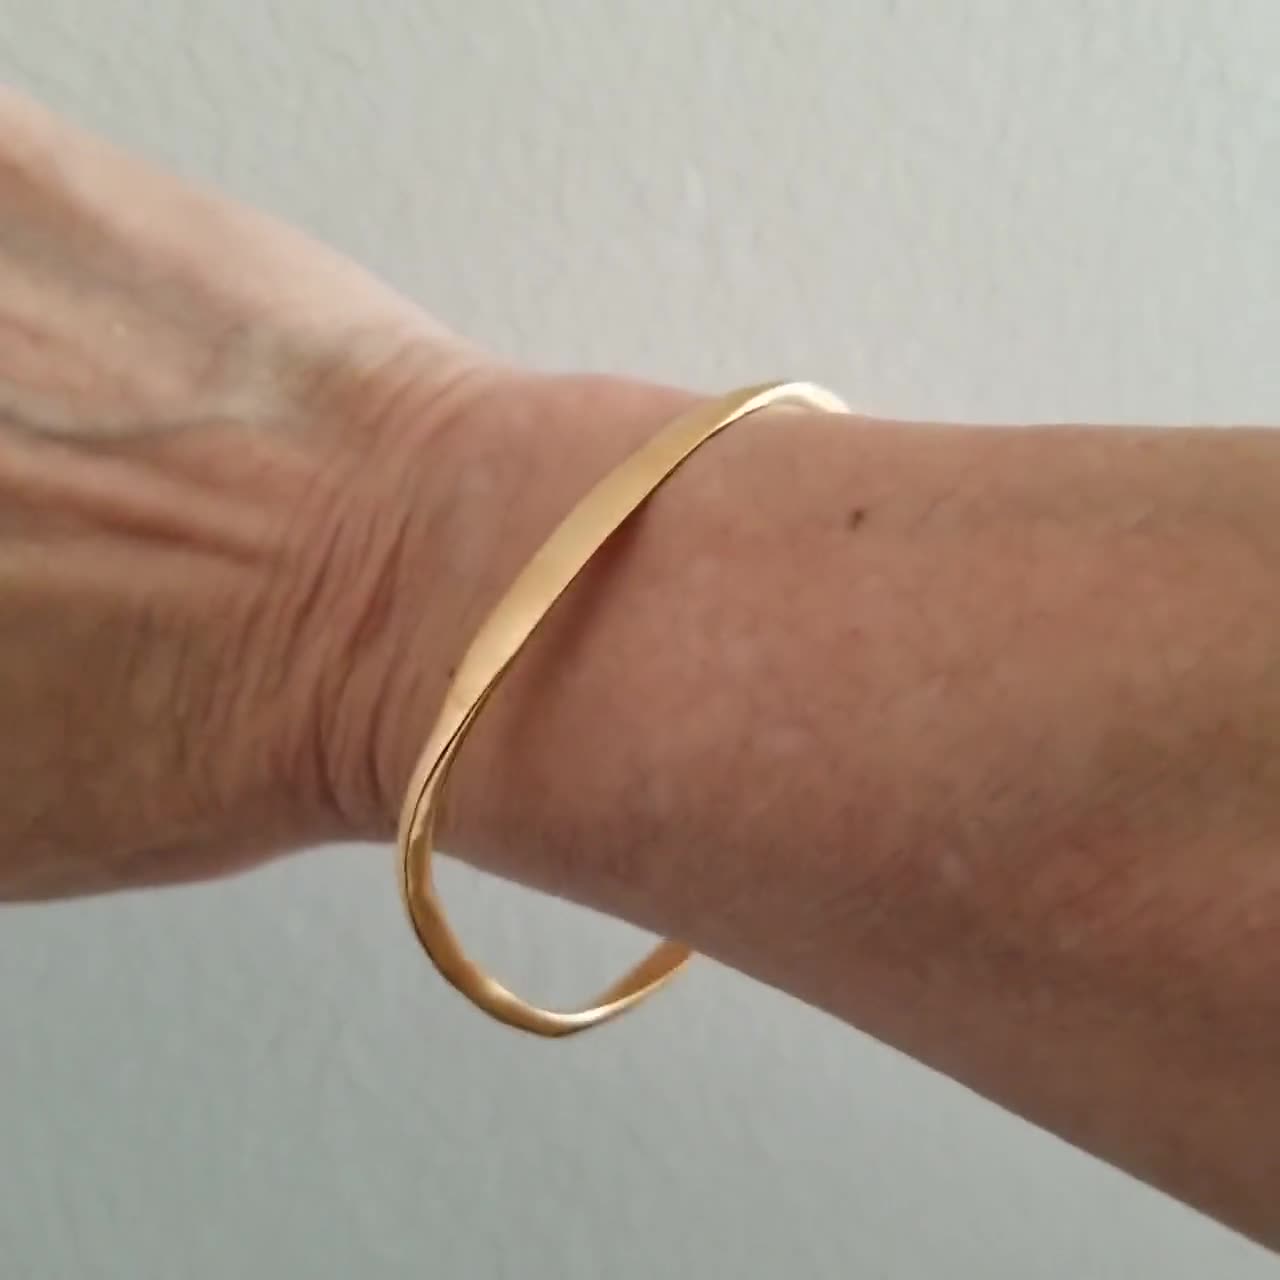 Thin Hammered Cuff in 14K Gold Fill; Delicate Handmade Stacking Bracelet for Women by Lotus Stone Design (Medium, Gold)